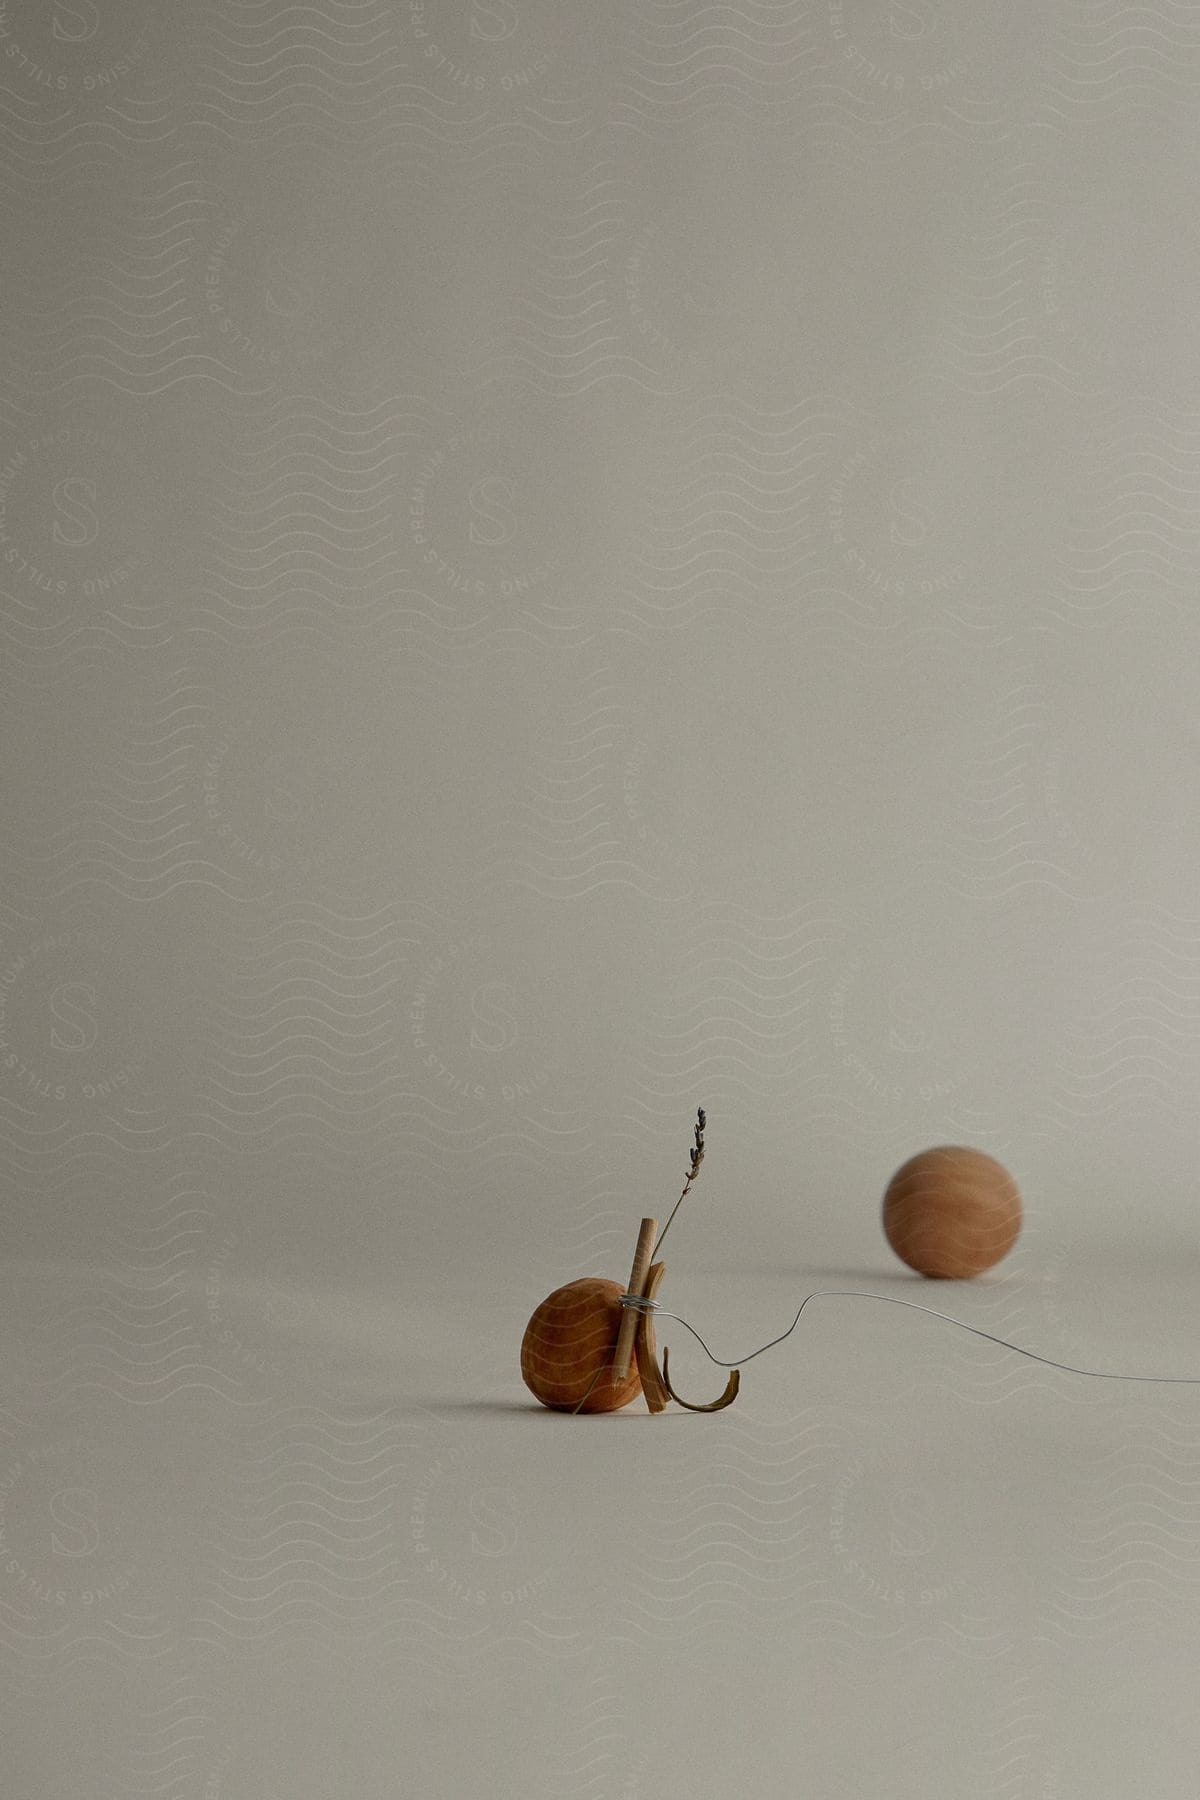 Two wooden tops, one upright with a string wrapped around it and the other blurred in the background, on a neutral surface.